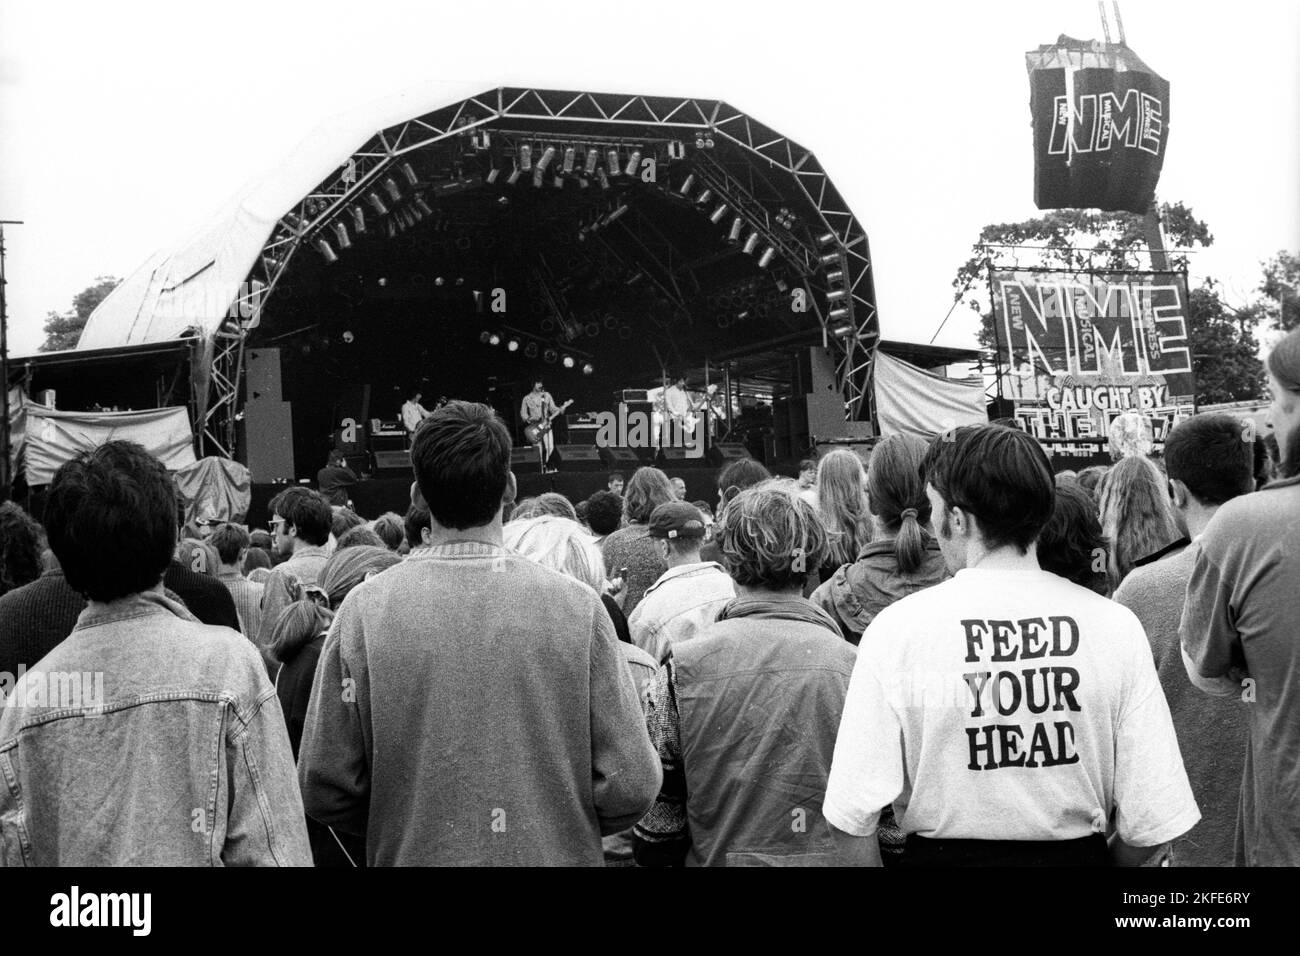 The second NME Stage field and crowd at the Glastonbury Festival, Pilton Farm, Somerset, England, June 1995. In 1995 the festival celebrated its 25th anniversary. Photo: ROB WATKINS Stock Photo